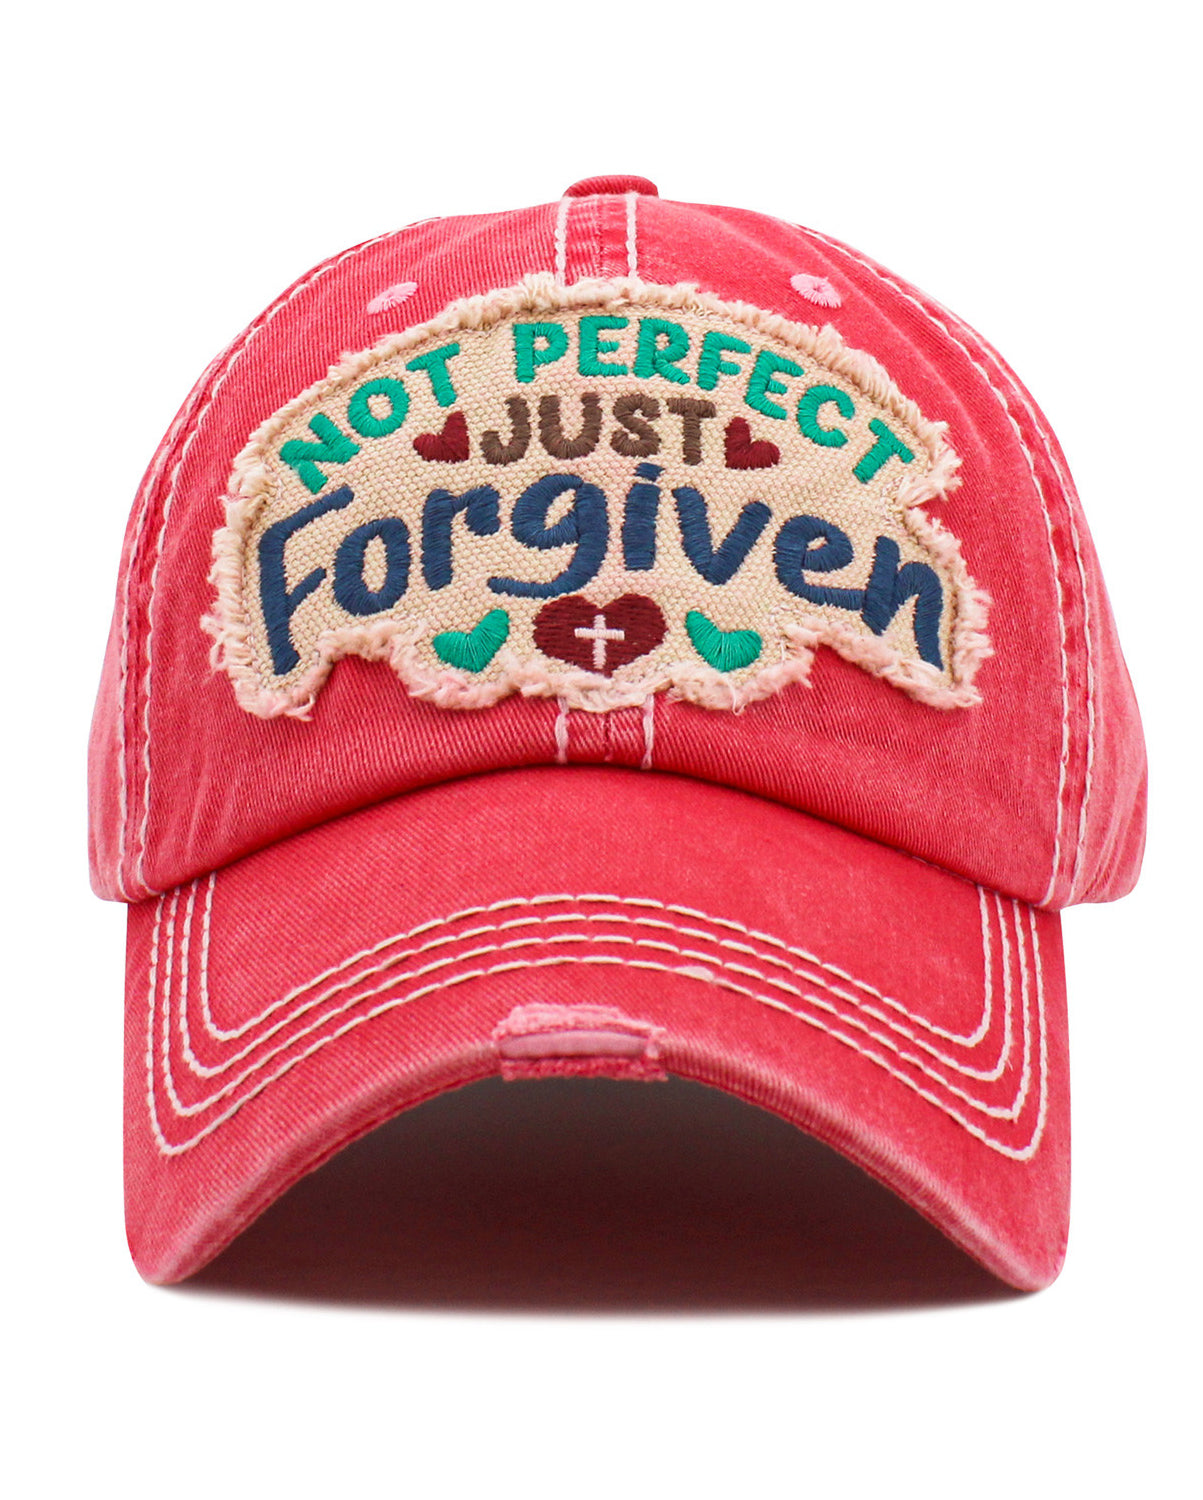 Not Perfect Just Forgiven Hat-Choose Color